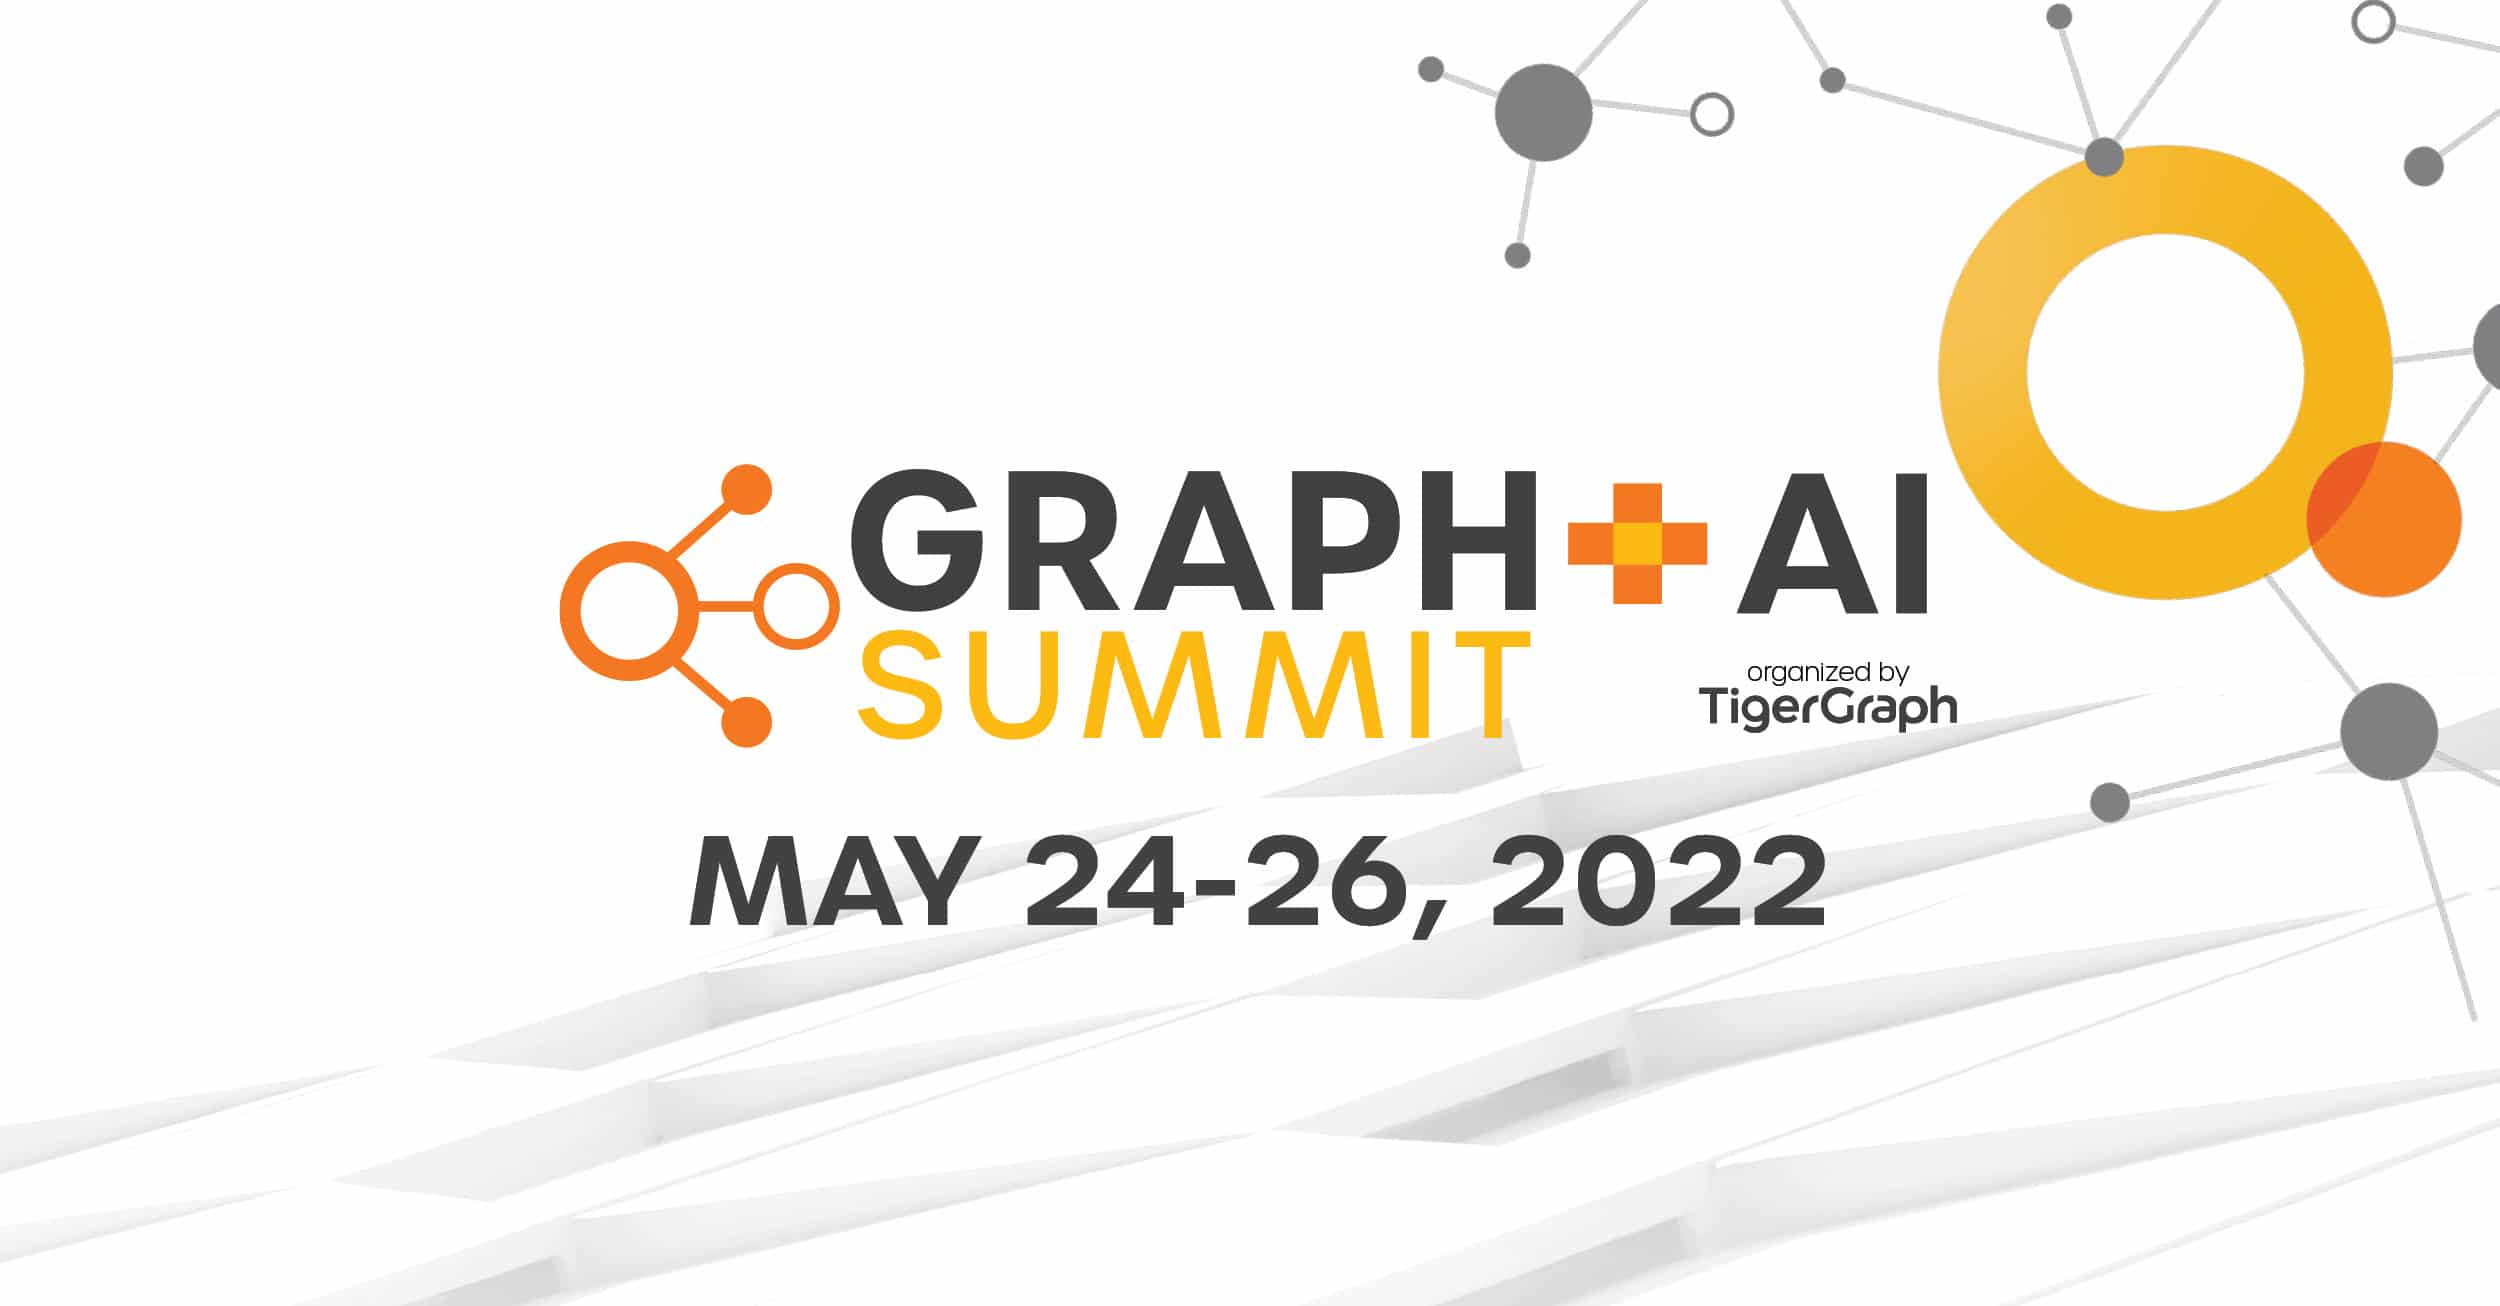 KEYNOTE: CONNECTING THE DOTS WITH GRAPH + AI